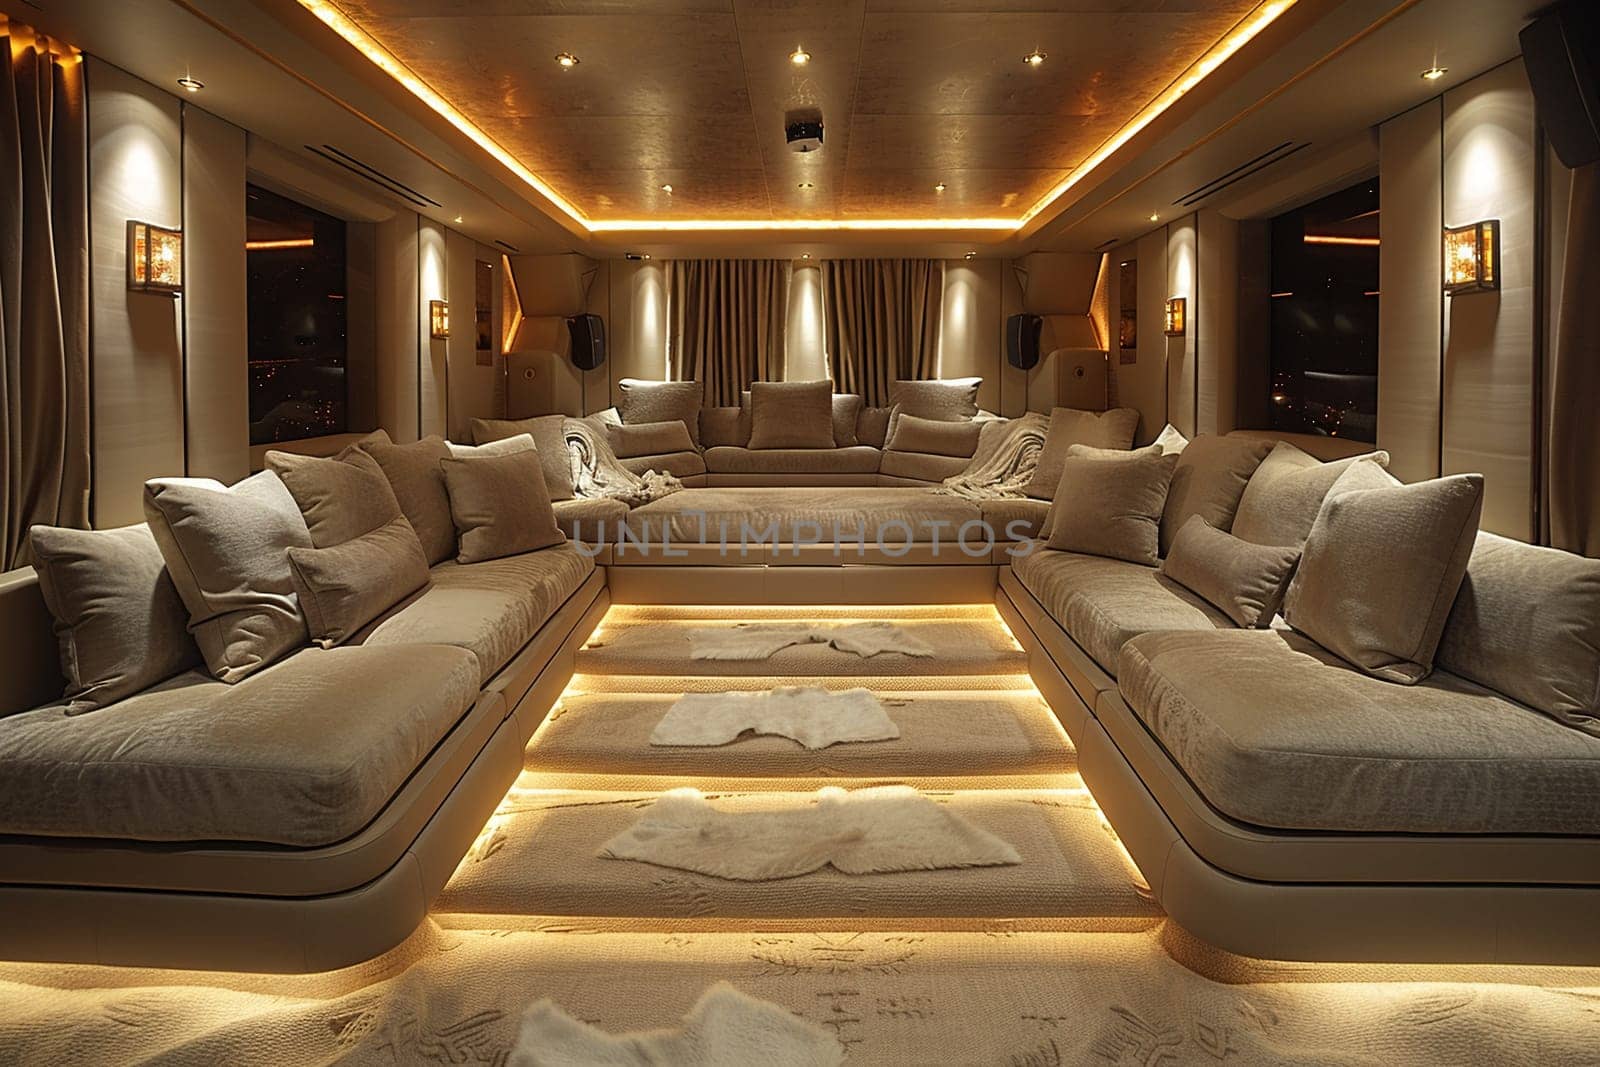 Luxurious home theater with plush seating and state-of-the-art sound system by Benzoix